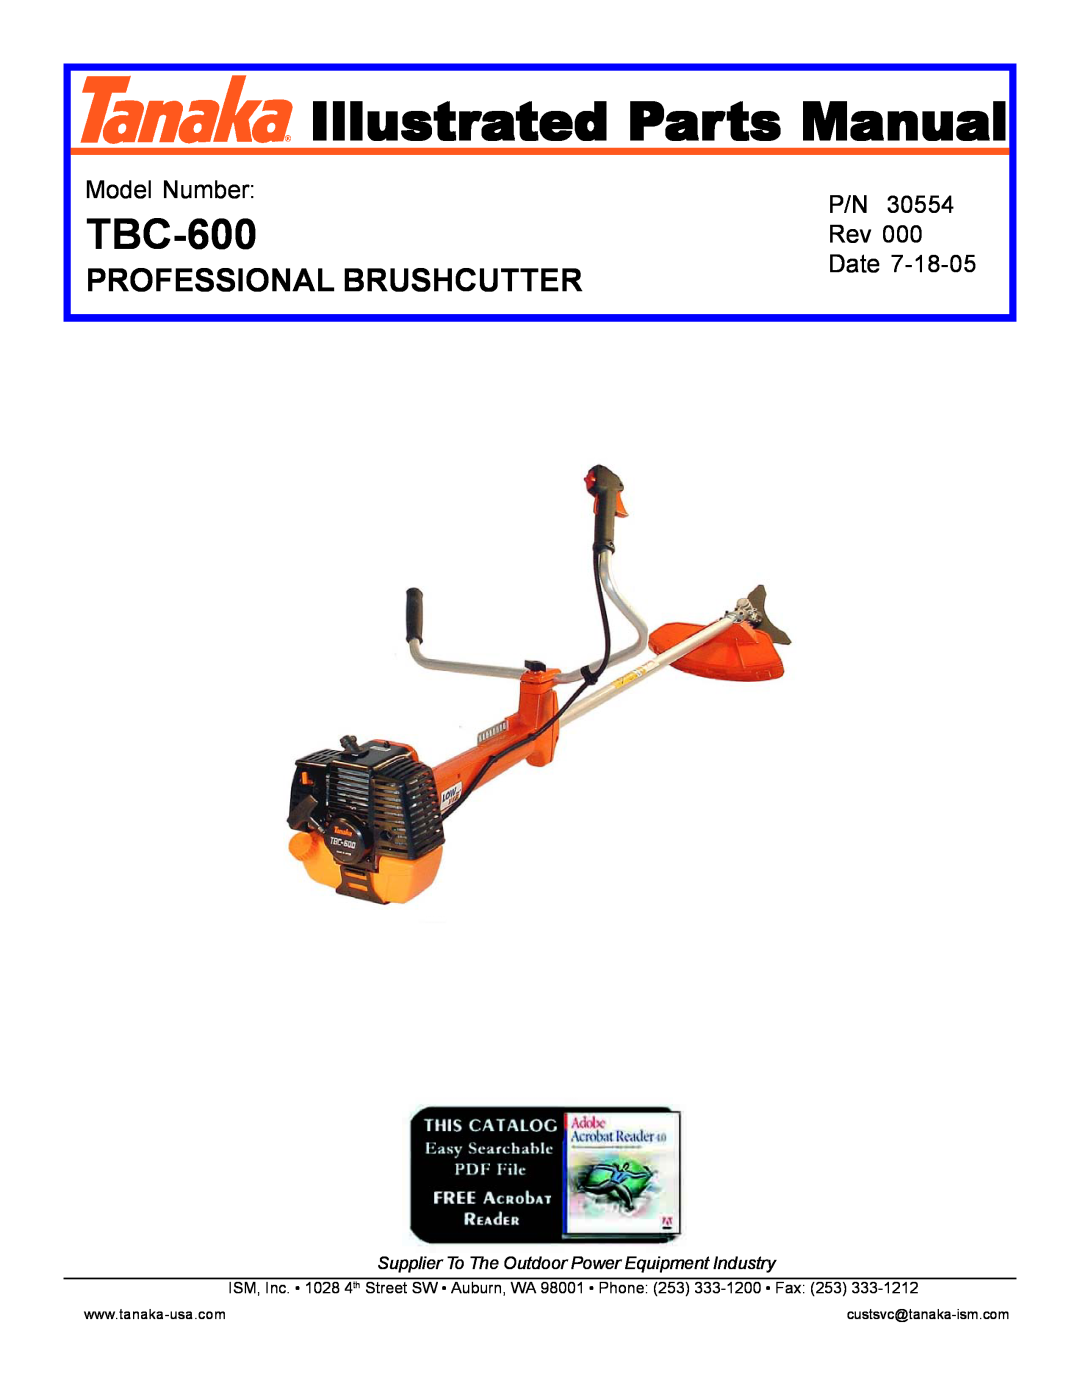 Tanaka TBC-600 manual Professional Brushcutter, Illustrated Parts Manual, Model Number, Date 